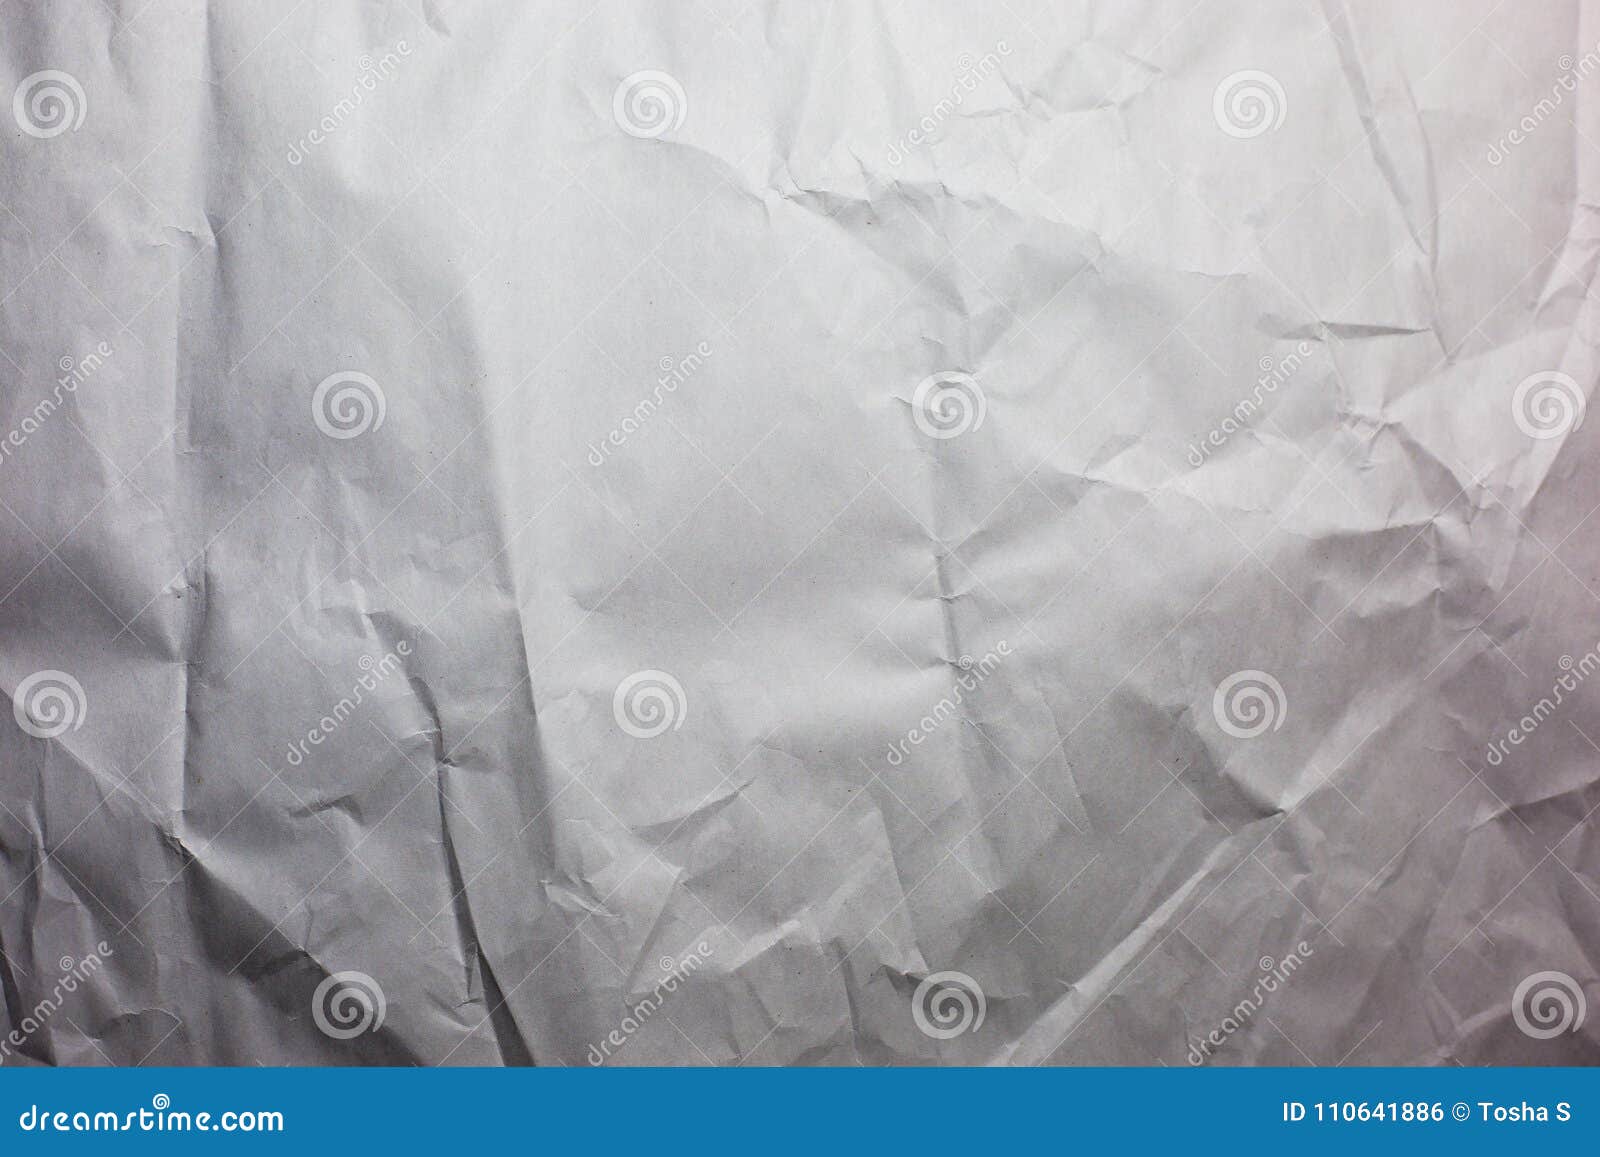 Crumpled Butchers Paper Texture Background. Stock Photo - Image of grungy,  background: 110641886